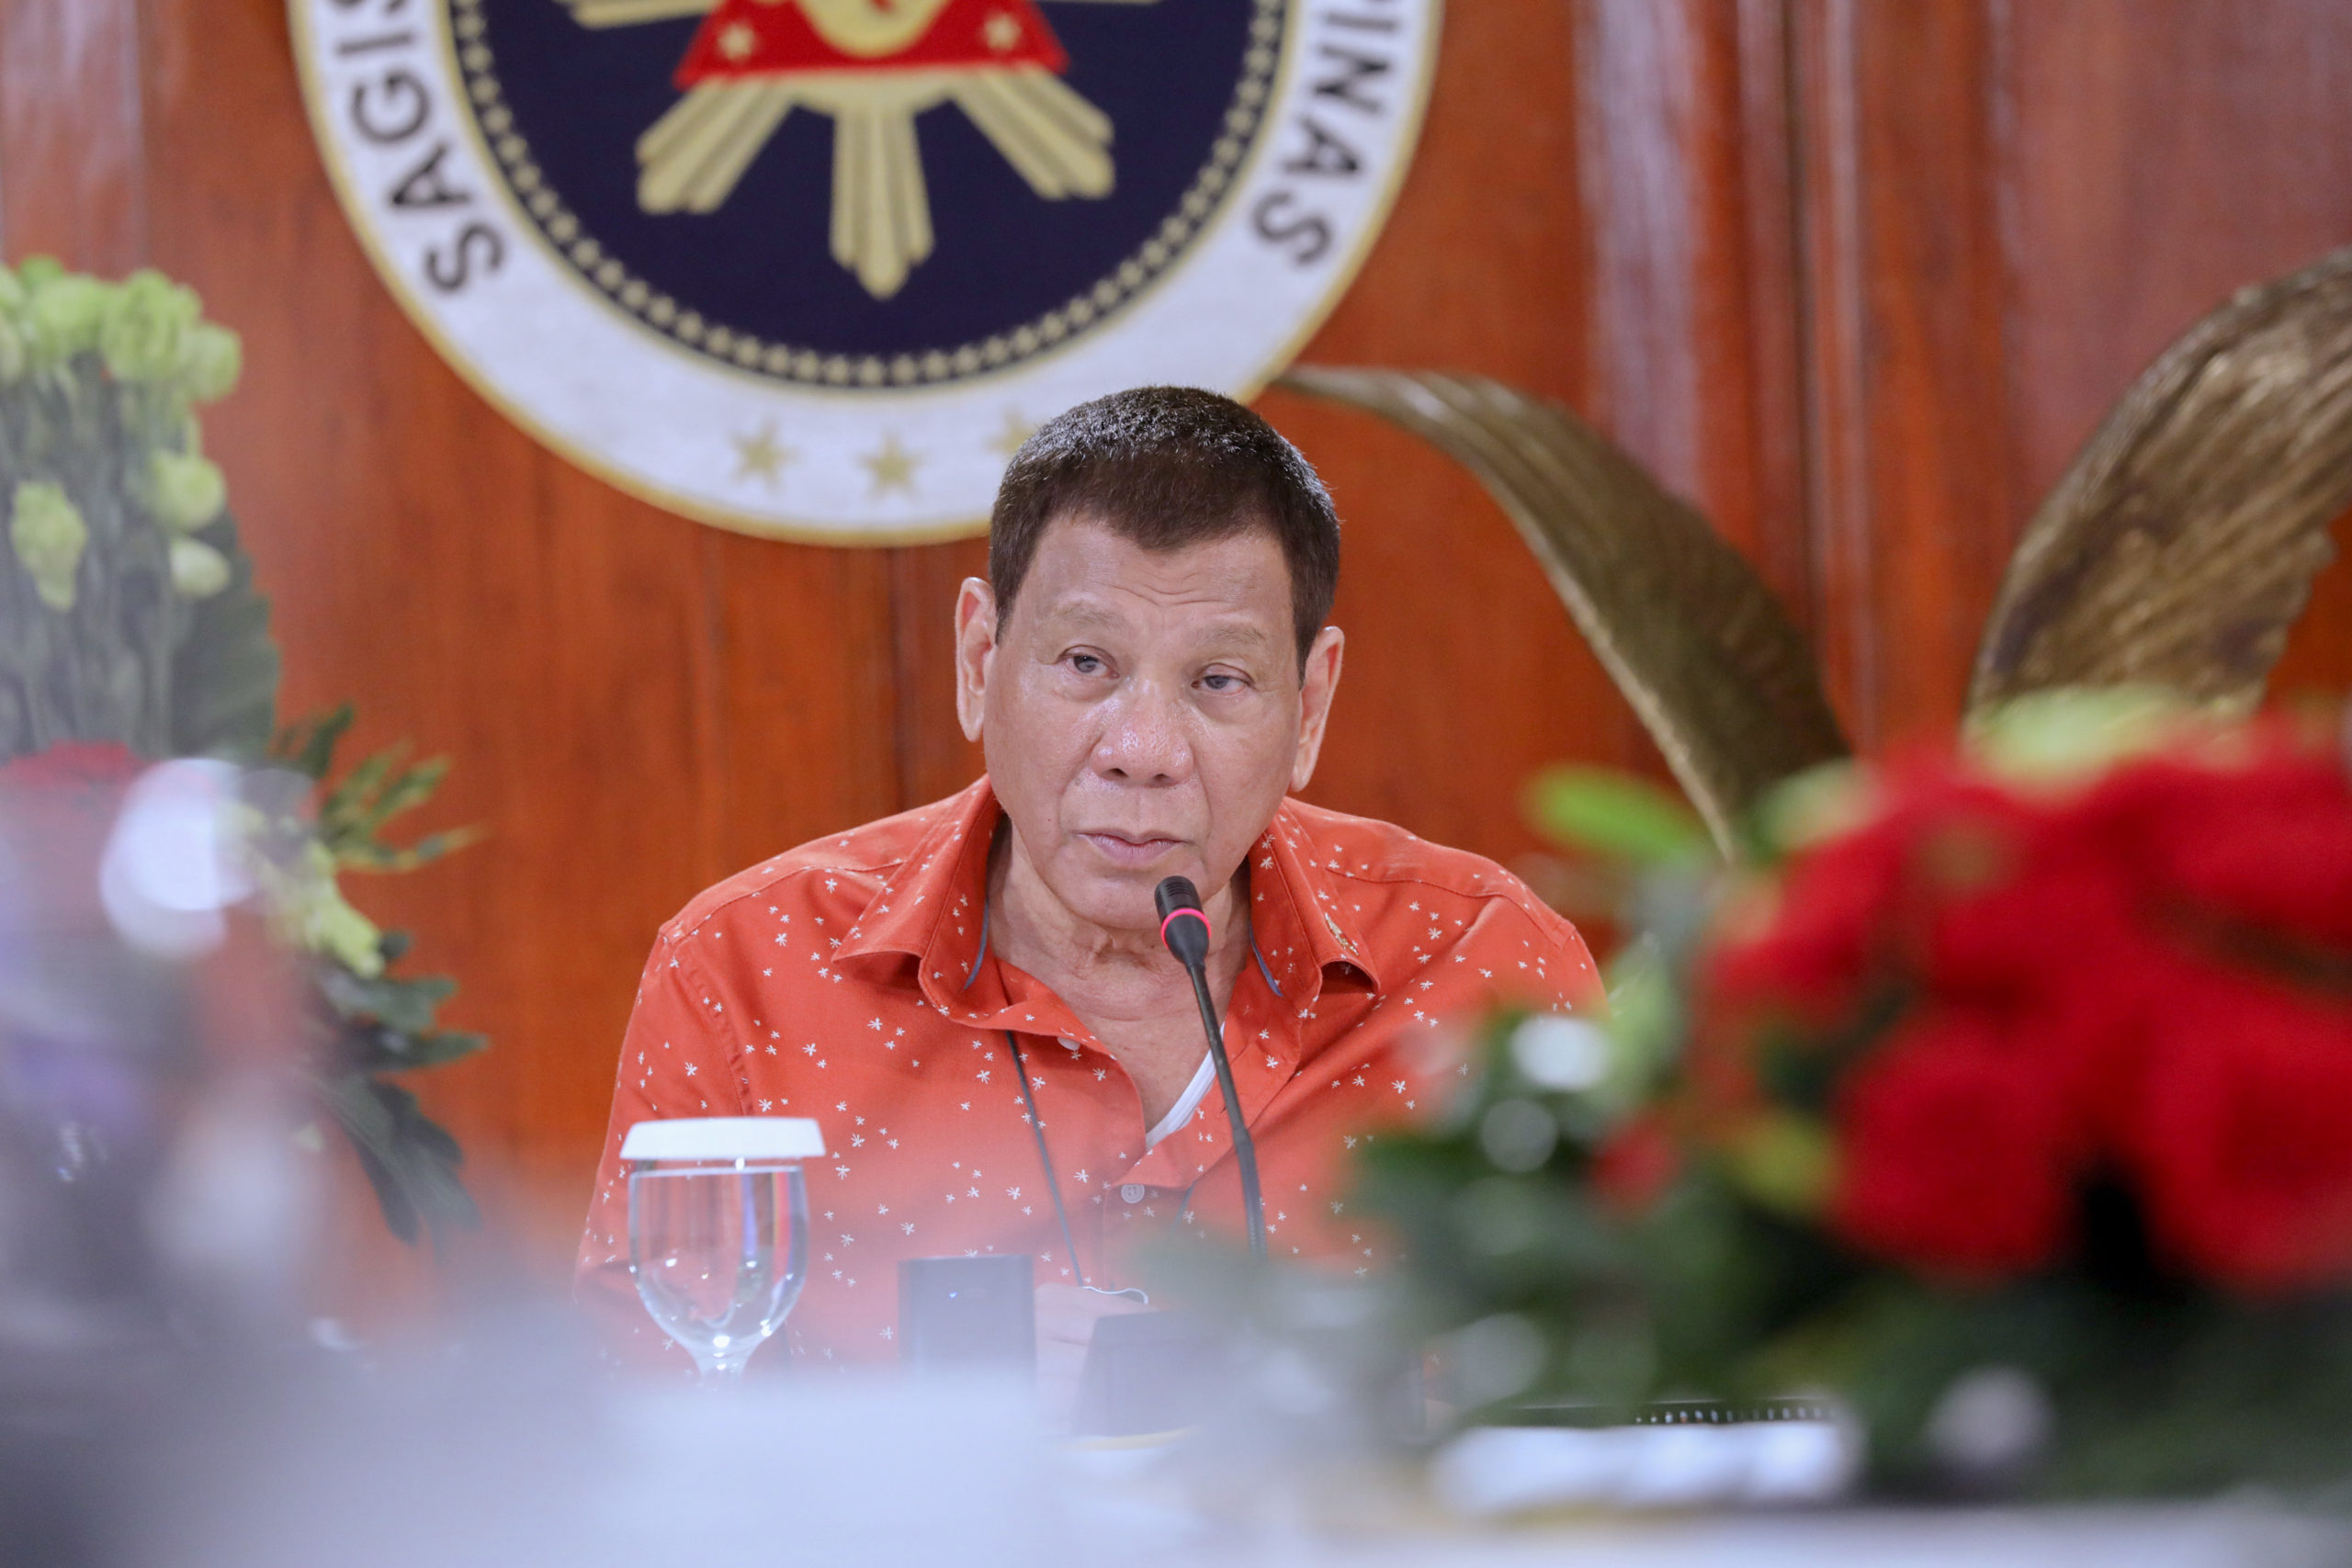 Duterte to join 13th Asia-Europe Meeting on Nov 25-26 via video conference